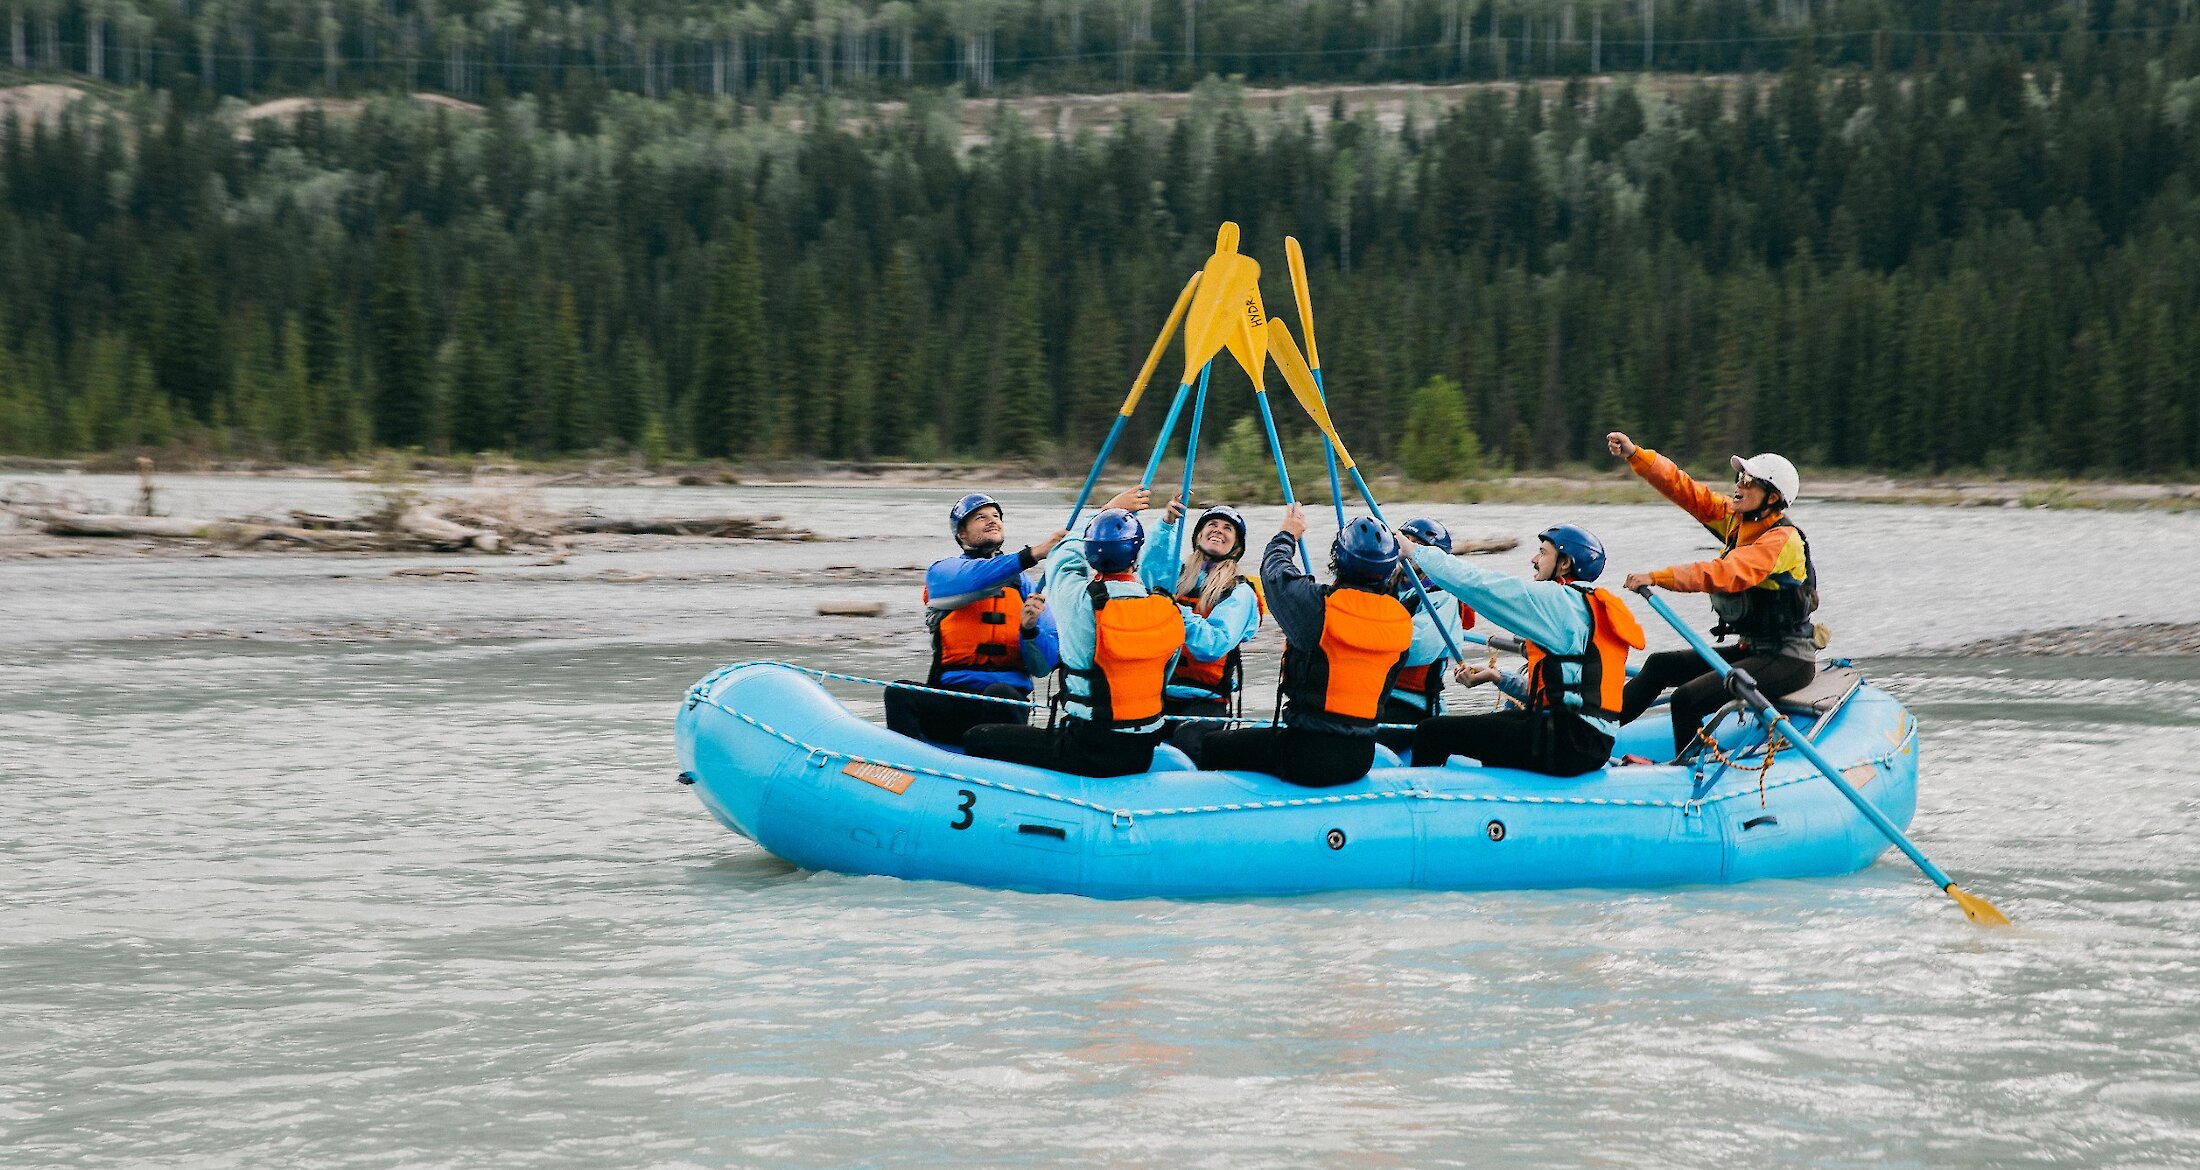 A raft floating on the Kicking Horse River before the rapids